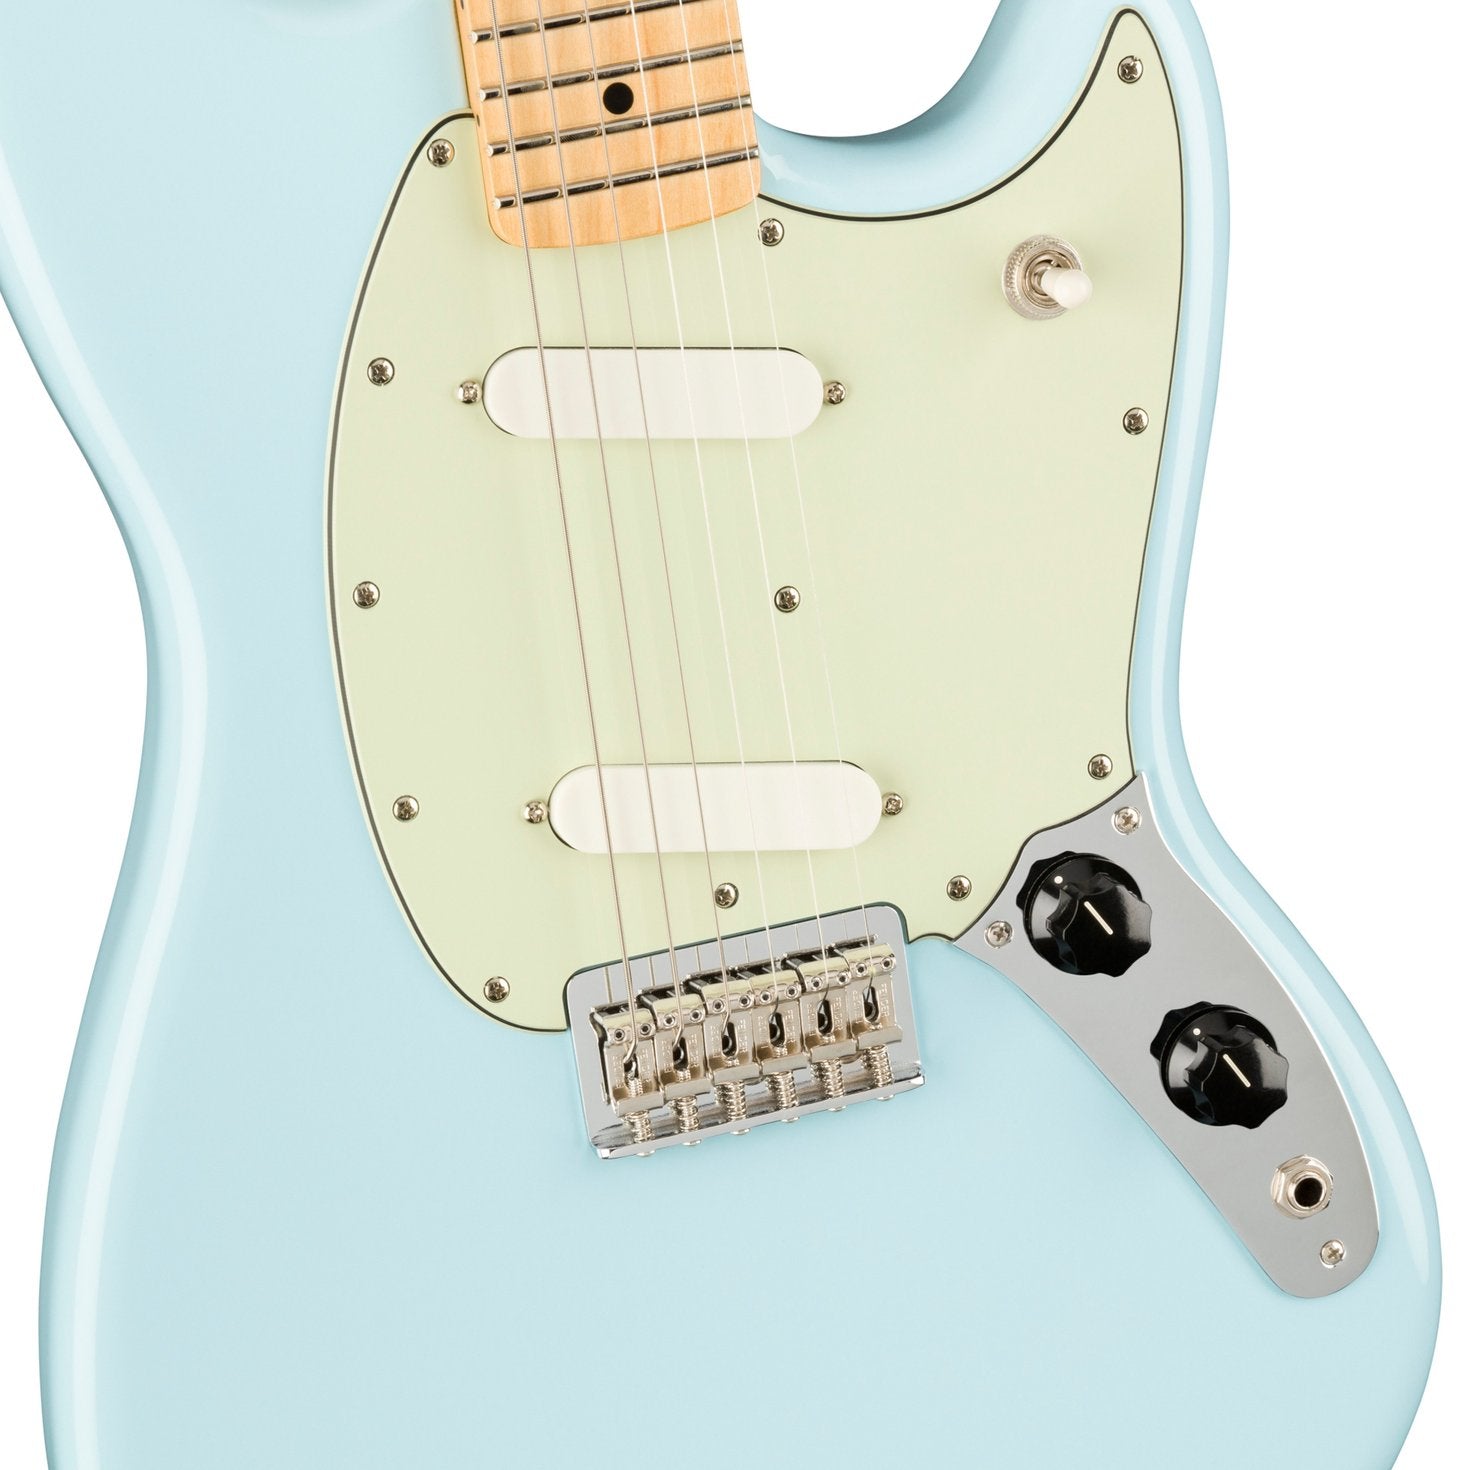 Fender Player Mustang Electric Guitar, Maple FB, Sonic Blue, FENDER, ELECTRIC GUITAR, fender-eletric-guitar-f03-014-4042-572, ZOSO MUSIC SDN BHD